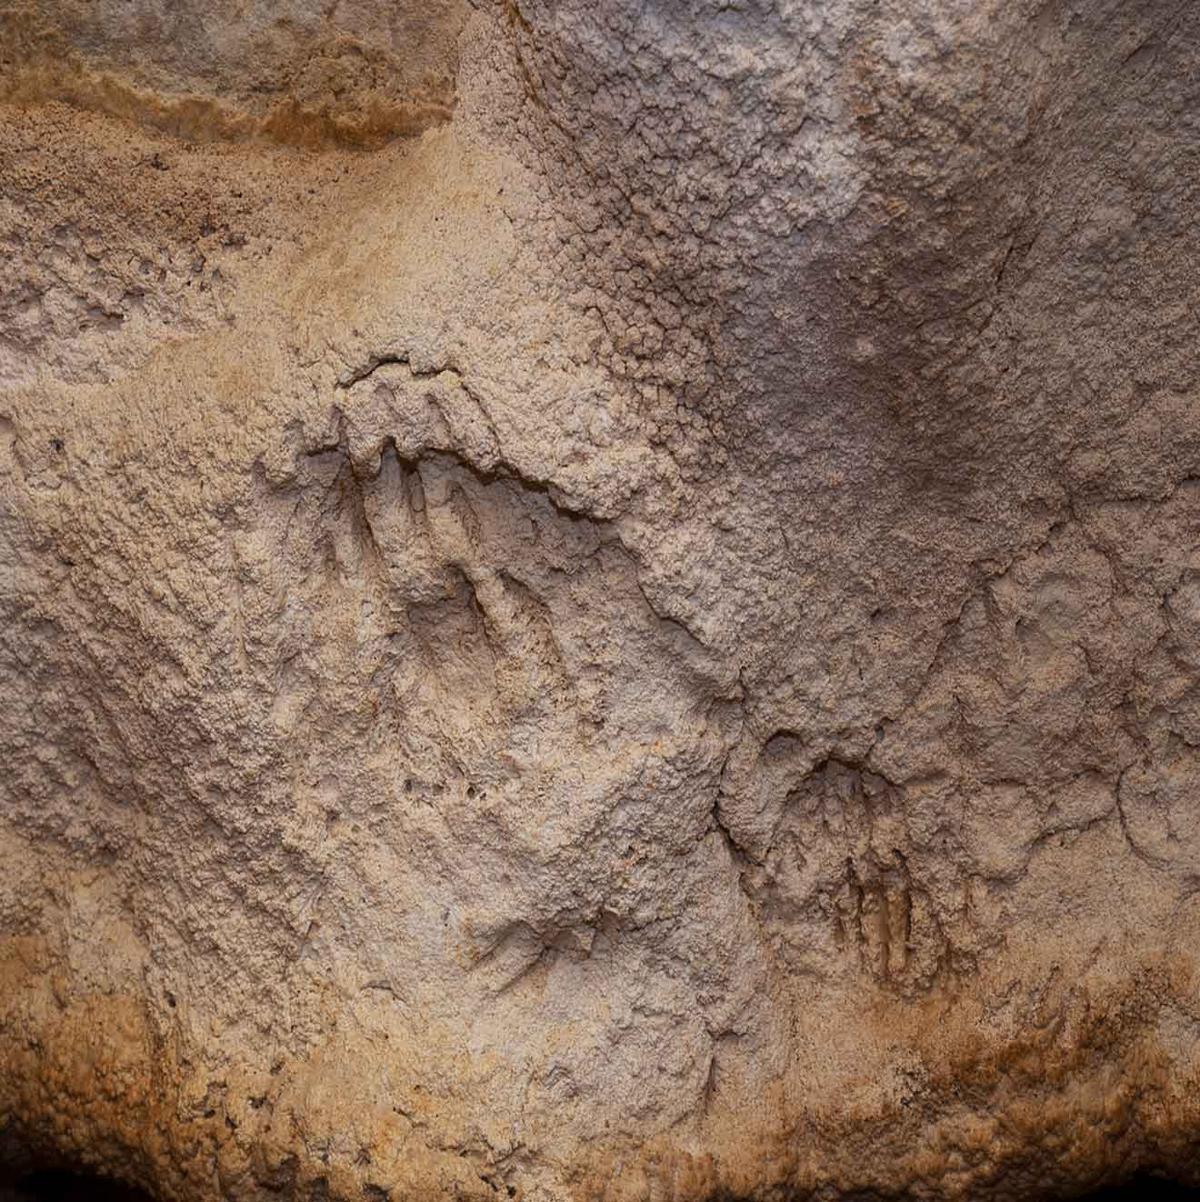 Marks that appear to have been made by the claws of a bear. (Courtesy of Ignacio Martín Lerma)